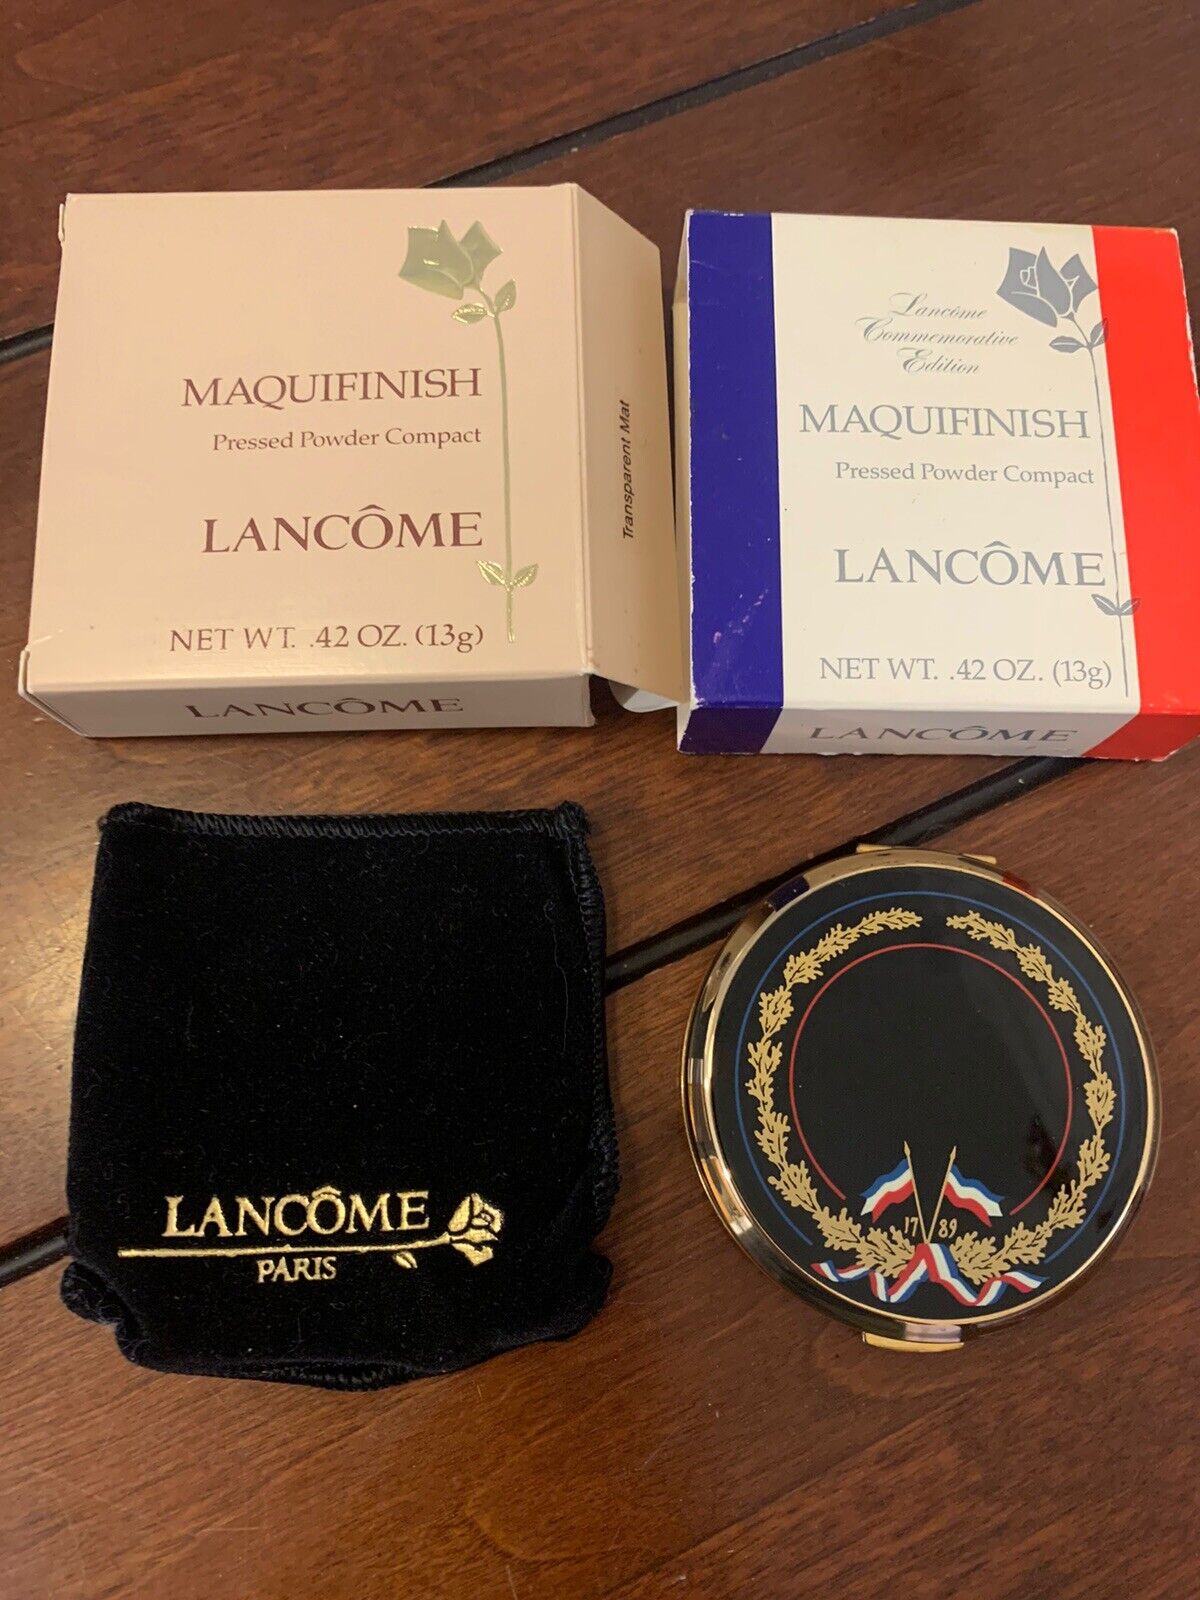 Lancome Compact Maquifinish Commemorative Edition Pressed Powder Vintage NEW